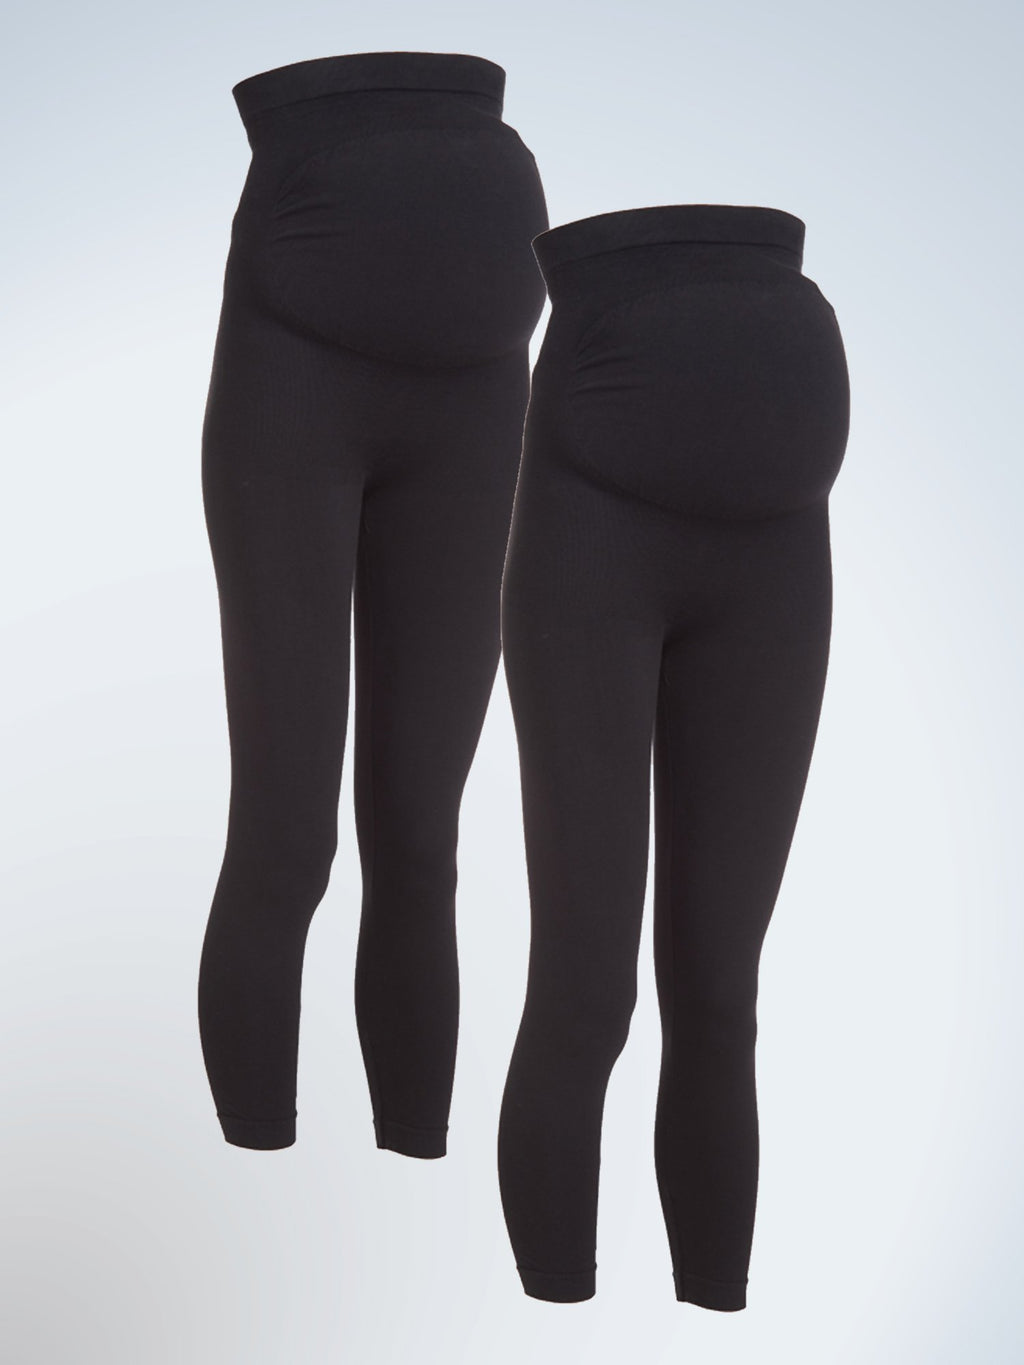 Maternity Support Leggings Patented Back Support 2-Pack – Leading Lady Inc.